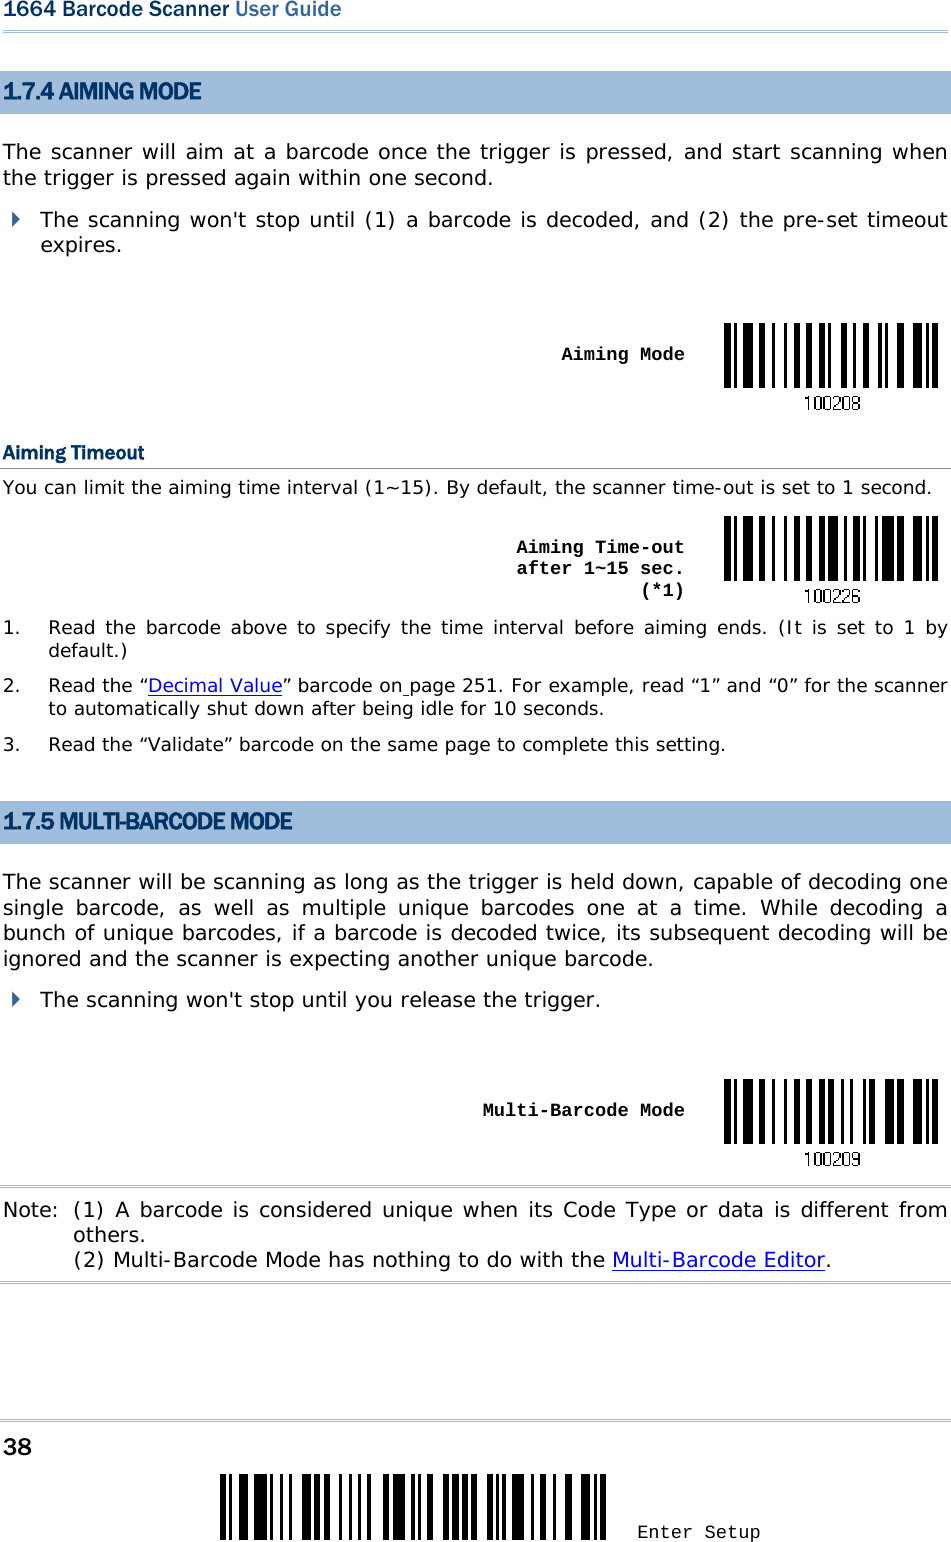 38 Enter Setup 1664 Barcode Scanner User Guide  1.7.4 AIMING MODE The scanner will aim at a barcode once the trigger is pressed, and start scanning when the trigger is pressed again within one second.  The scanning won&apos;t stop until (1) a barcode is decoded, and (2) the pre-set timeout expires.   Aiming ModeAiming Timeout You can limit the aiming time interval (1~15). By default, the scanner time-out is set to 1 second.  Aiming Time-out after 1~15 sec.  (*1)1.  Read the barcode above to specify the time interval before aiming ends. (It is set to 1 by default.) 2. Read the “Decimal Value” barcode on page 251. For example, read “1” and “0” for the scanner to automatically shut down after being idle for 10 seconds. 3.  Read the “Validate” barcode on the same page to complete this setting.  1.7.5 MULTI-BARCODE MODE The scanner will be scanning as long as the trigger is held down, capable of decoding one single barcode, as well as multiple unique barcodes one at a time. While decoding a bunch of unique barcodes, if a barcode is decoded twice, its subsequent decoding will be ignored and the scanner is expecting another unique barcode.  The scanning won&apos;t stop until you release the trigger.   Multi-Barcode ModeNote: (1) A barcode is considered unique when its Code Type or data is different from others.            (2) Multi-Barcode Mode has nothing to do with the Multi-Barcode Editor.     